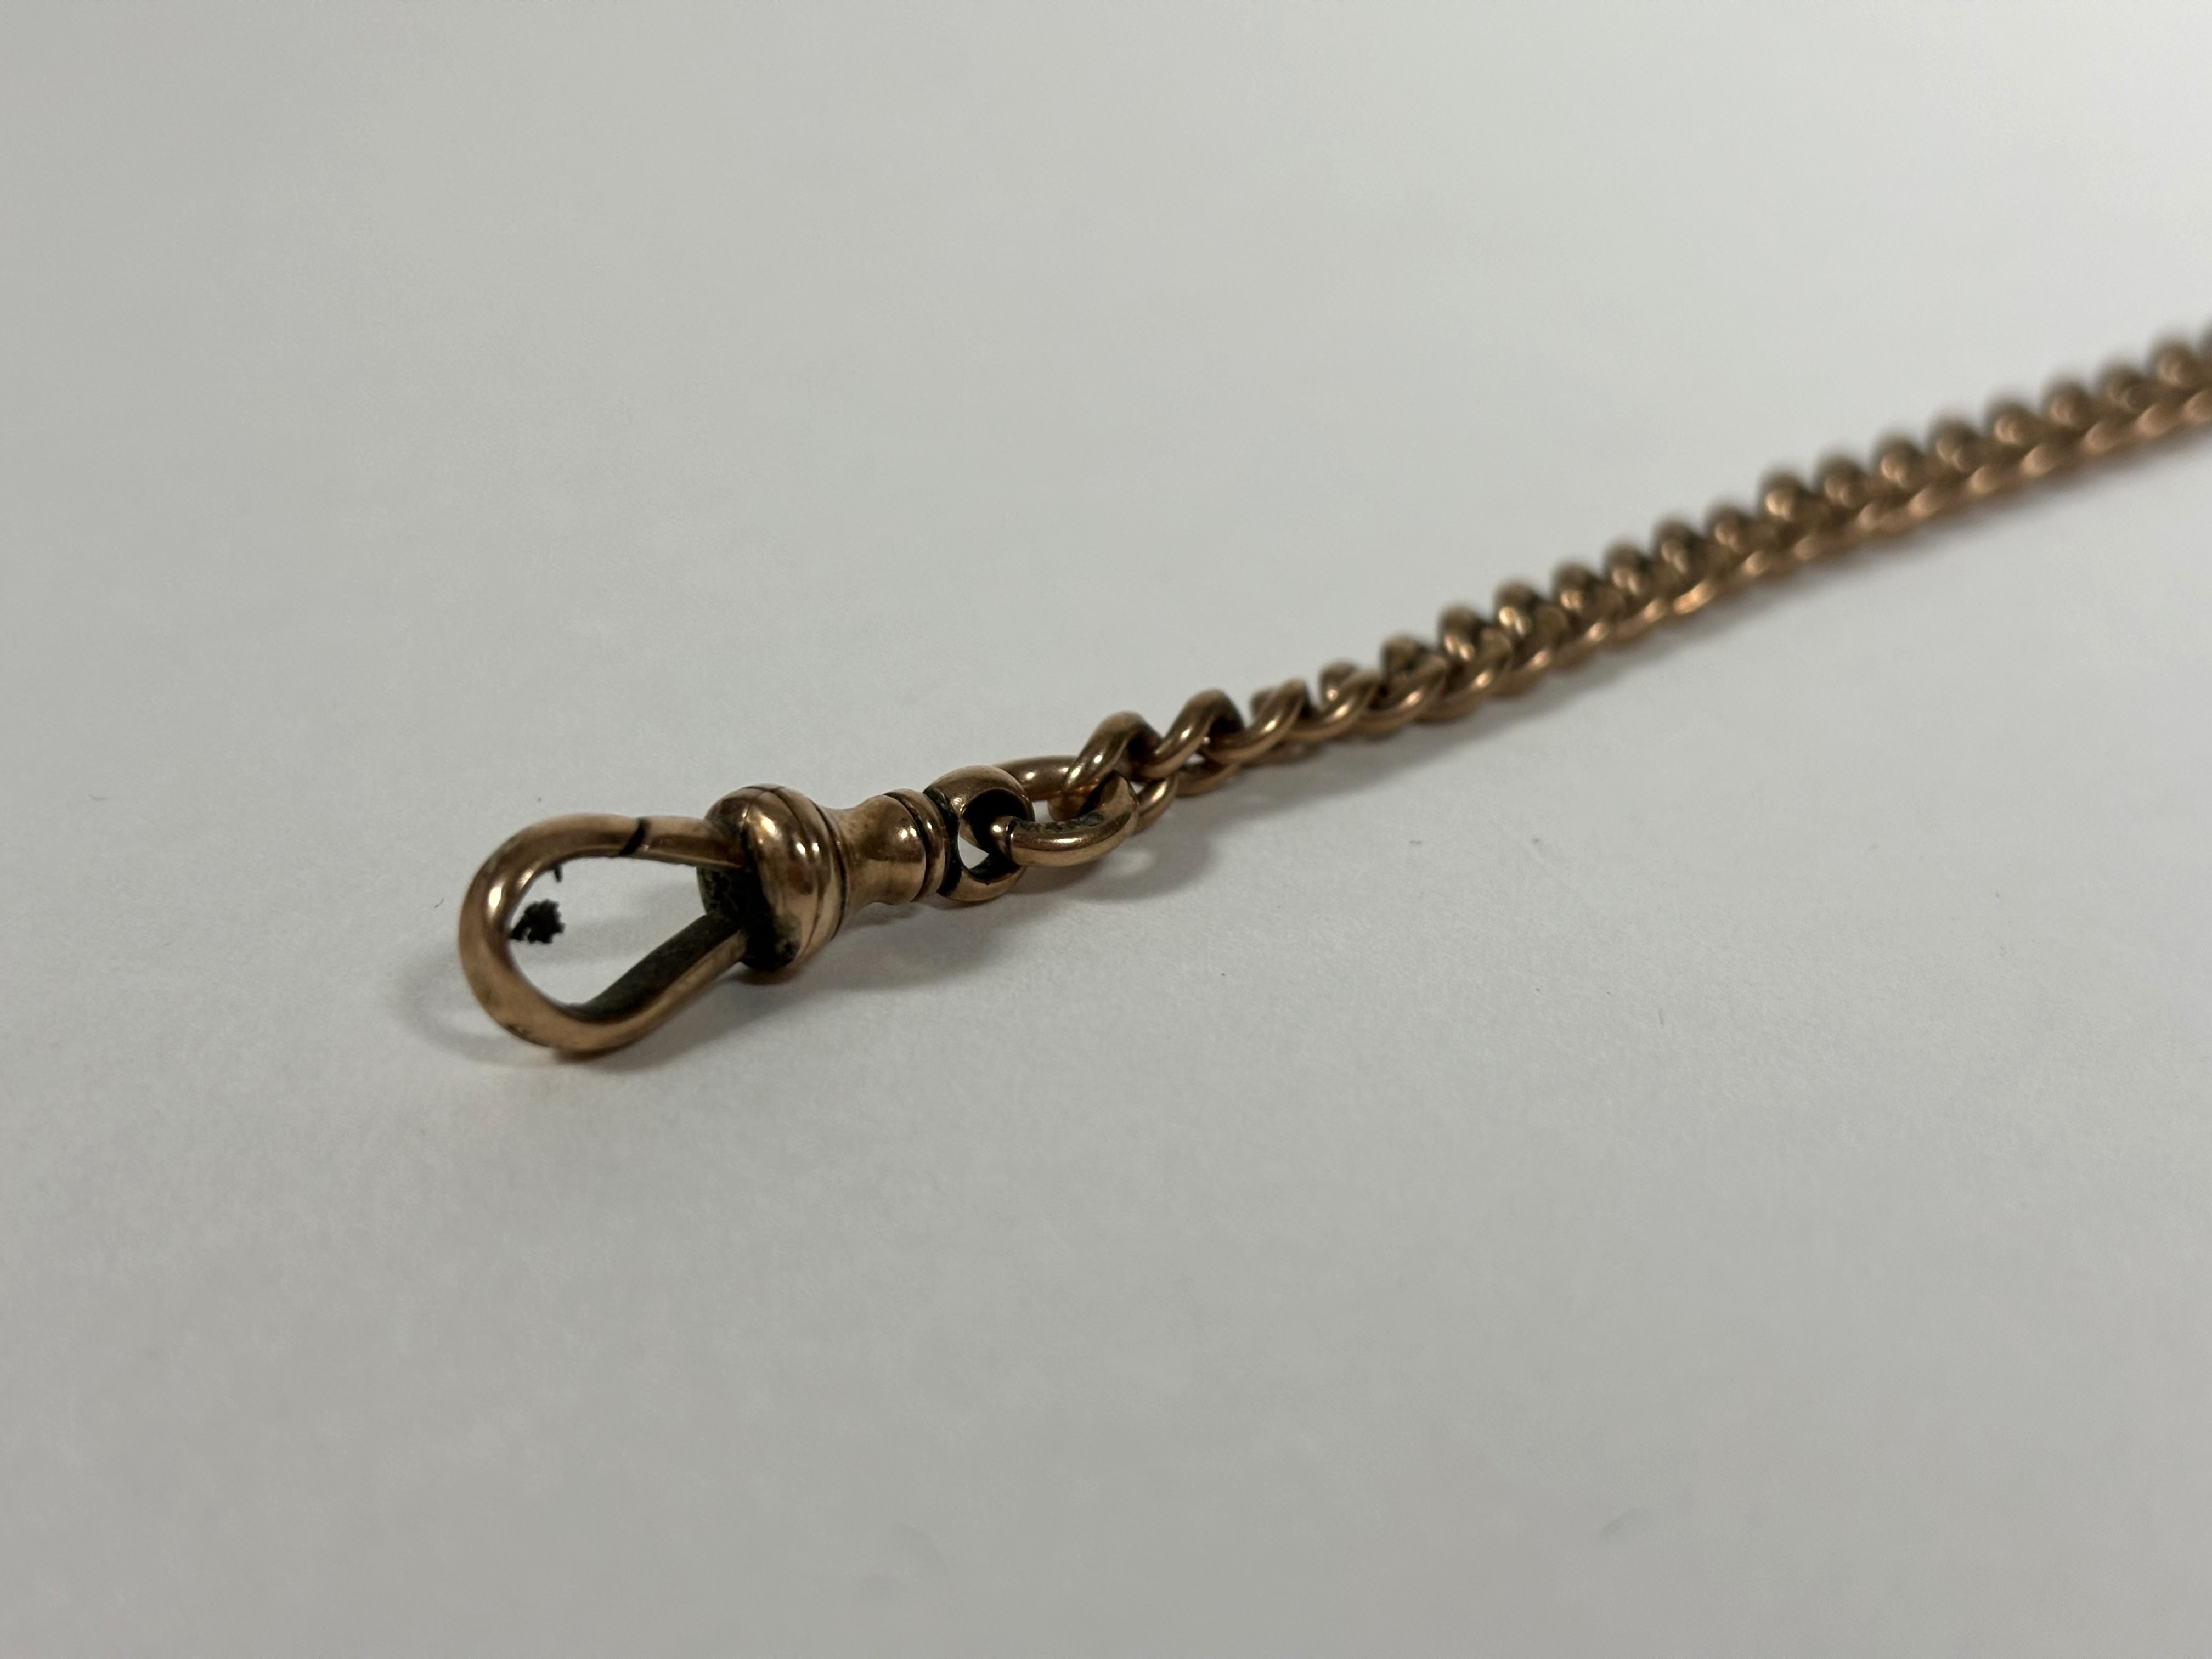 A 9ct gold curblink Albert watch chain, with T-bar, the chain stamped "375", the T-bar "9c". - Image 3 of 3